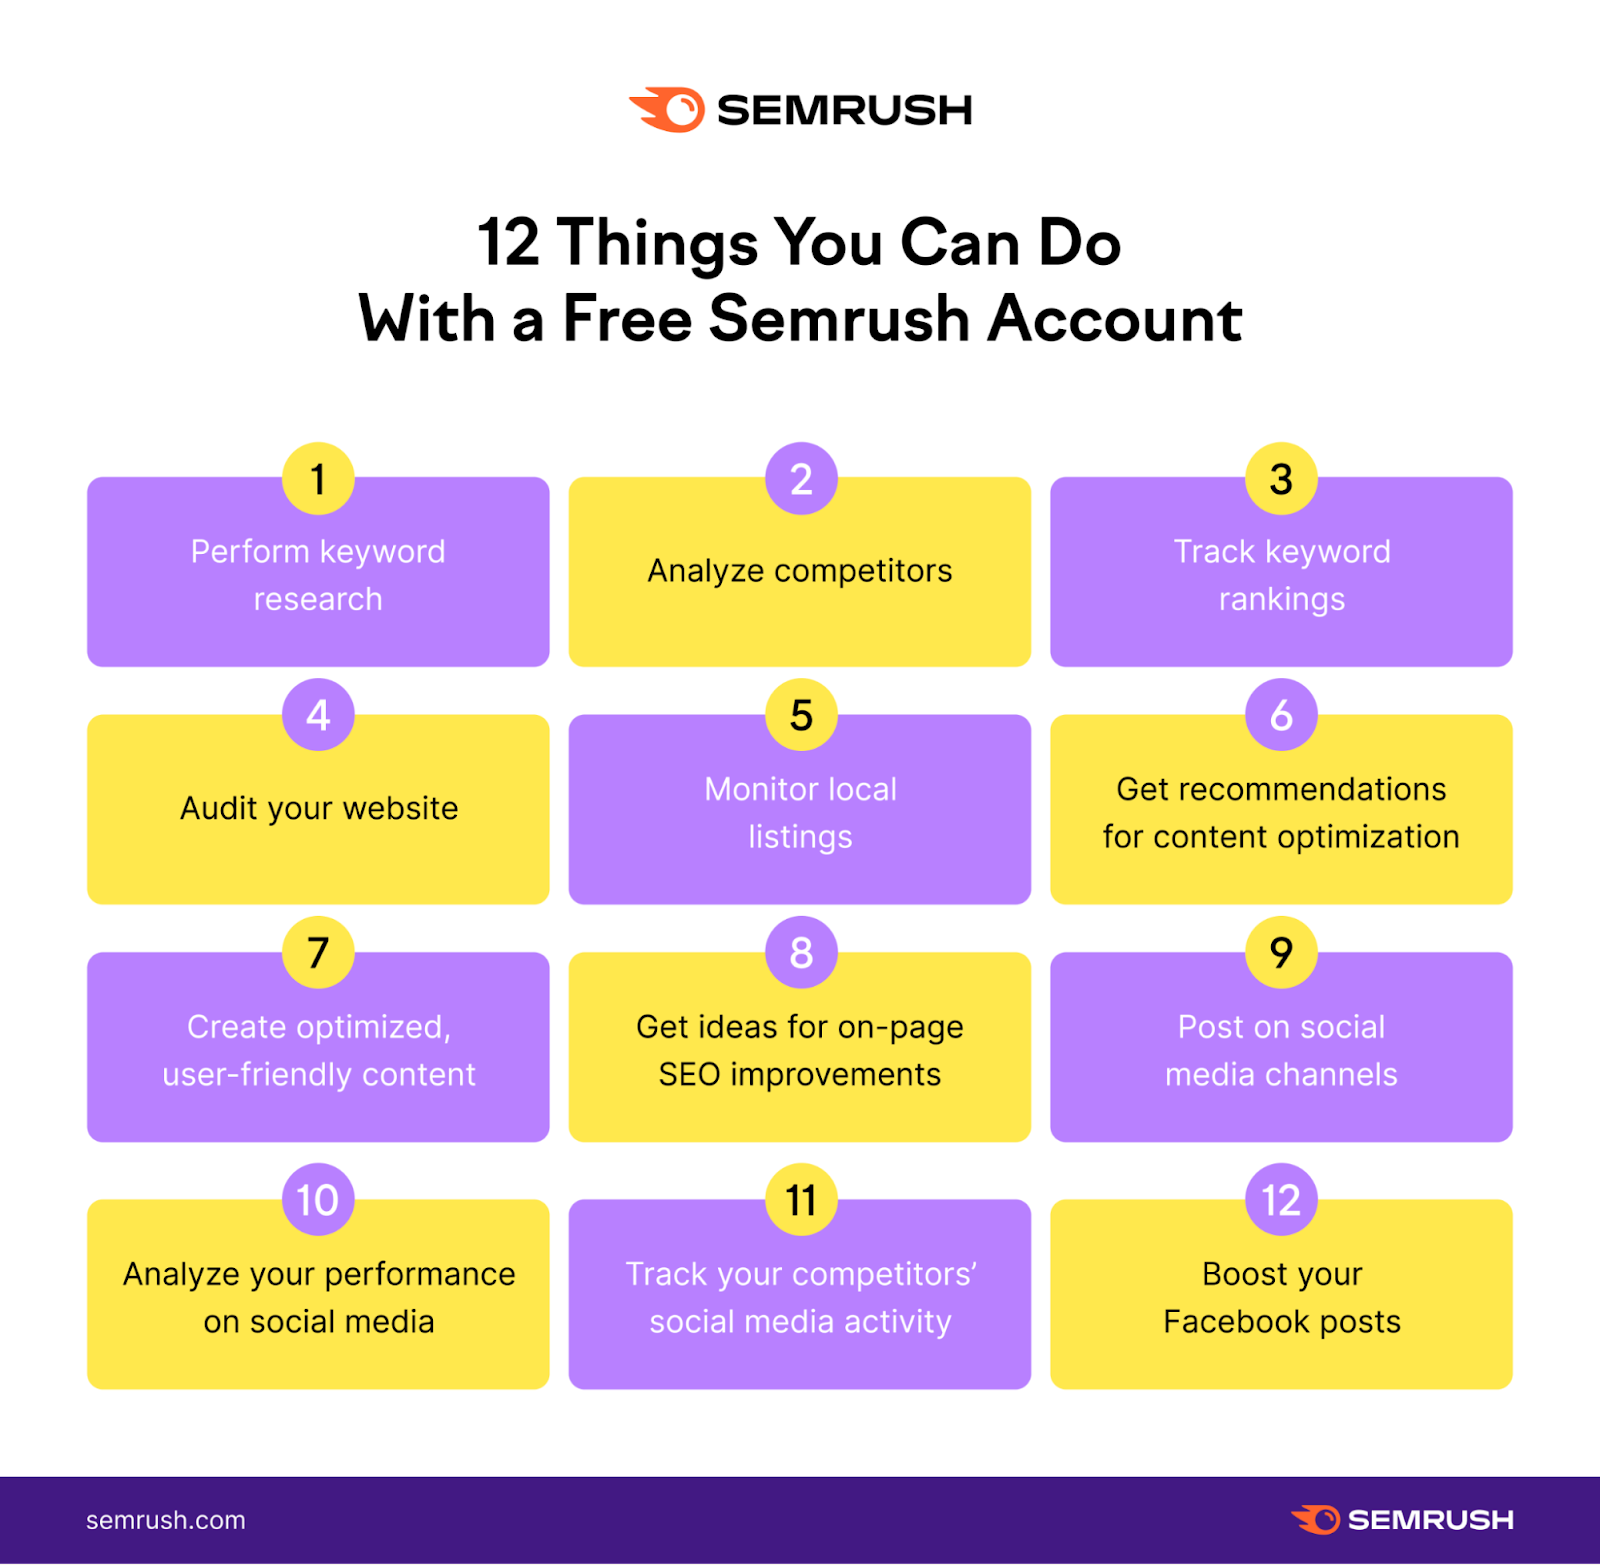 12 things you can do with a free Semrush account